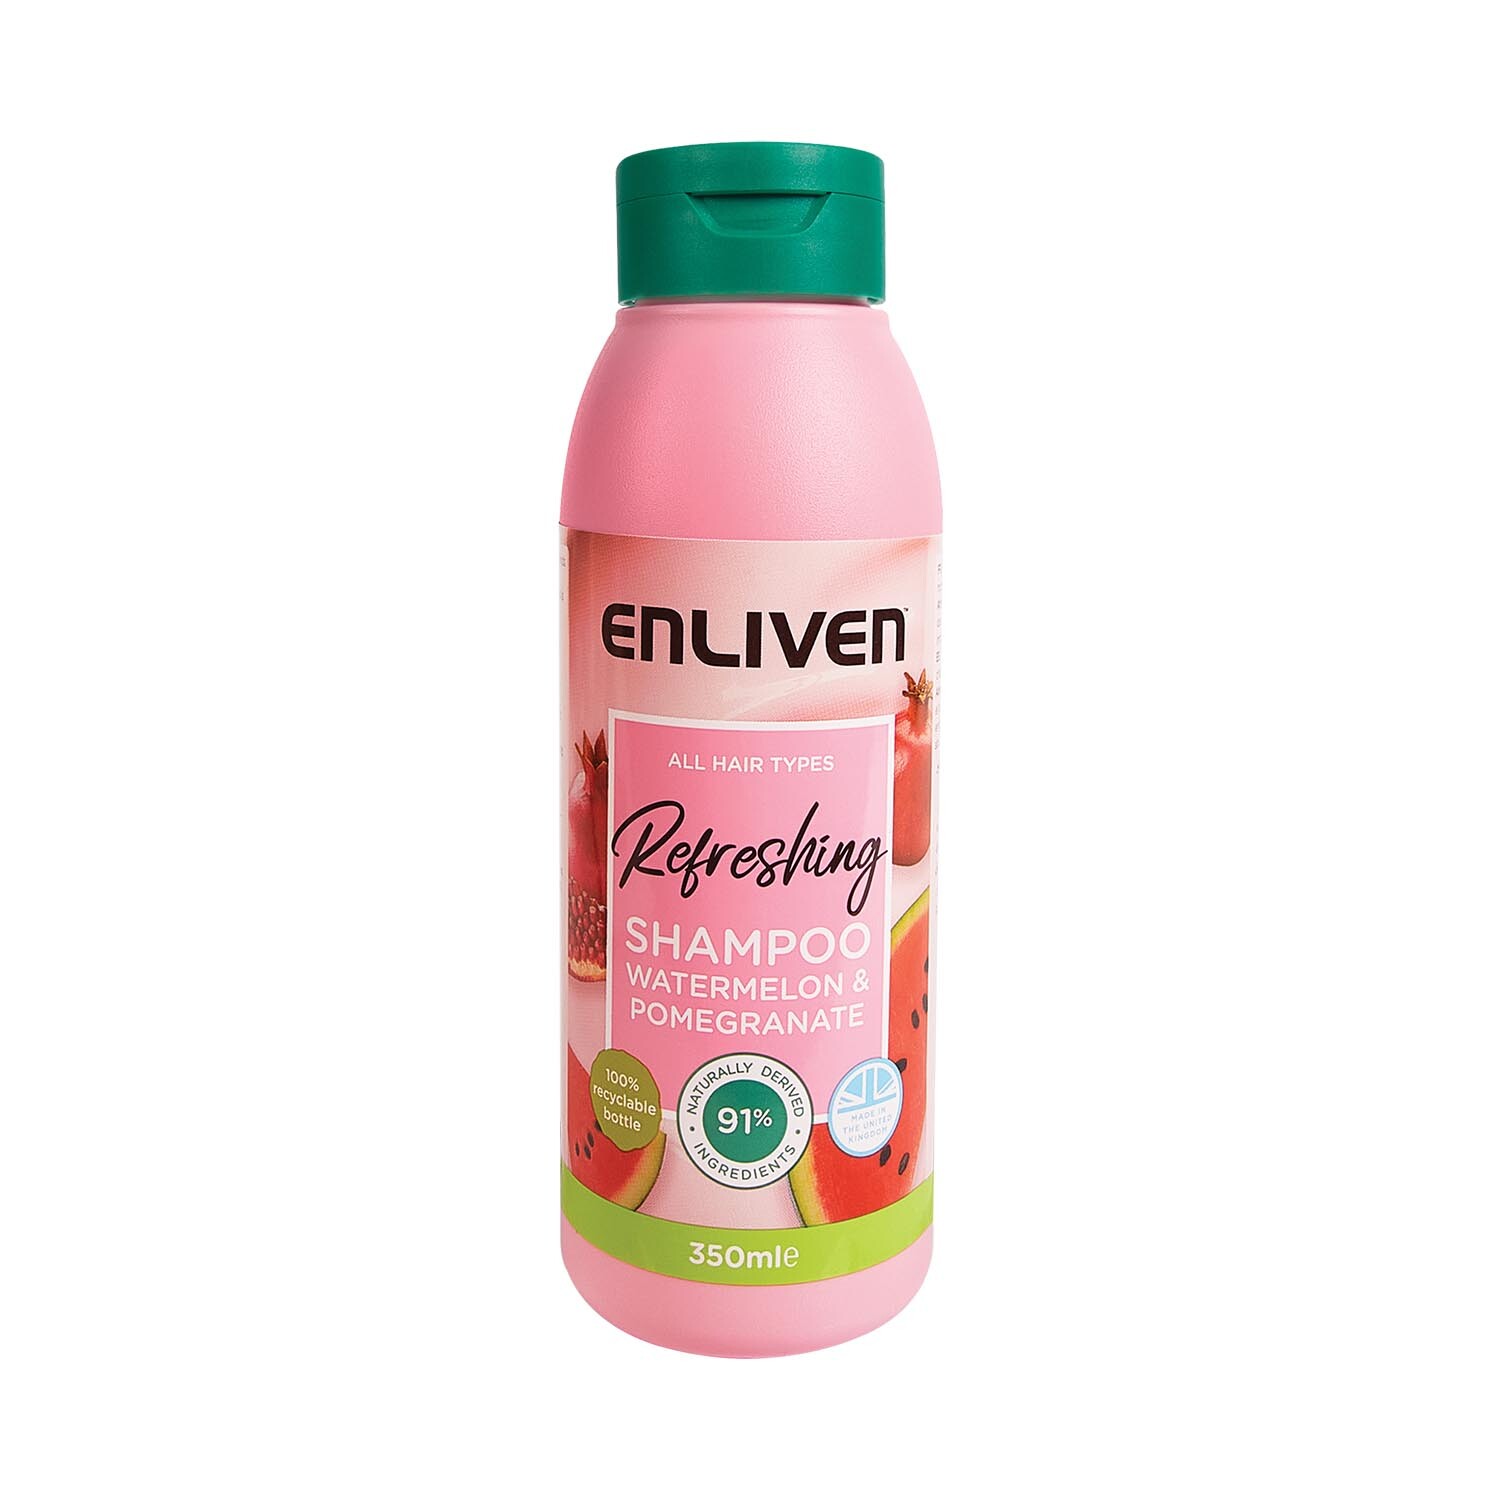 Enliven Refreshing Watermelon and Pomegranate Shampoo 350ml Image